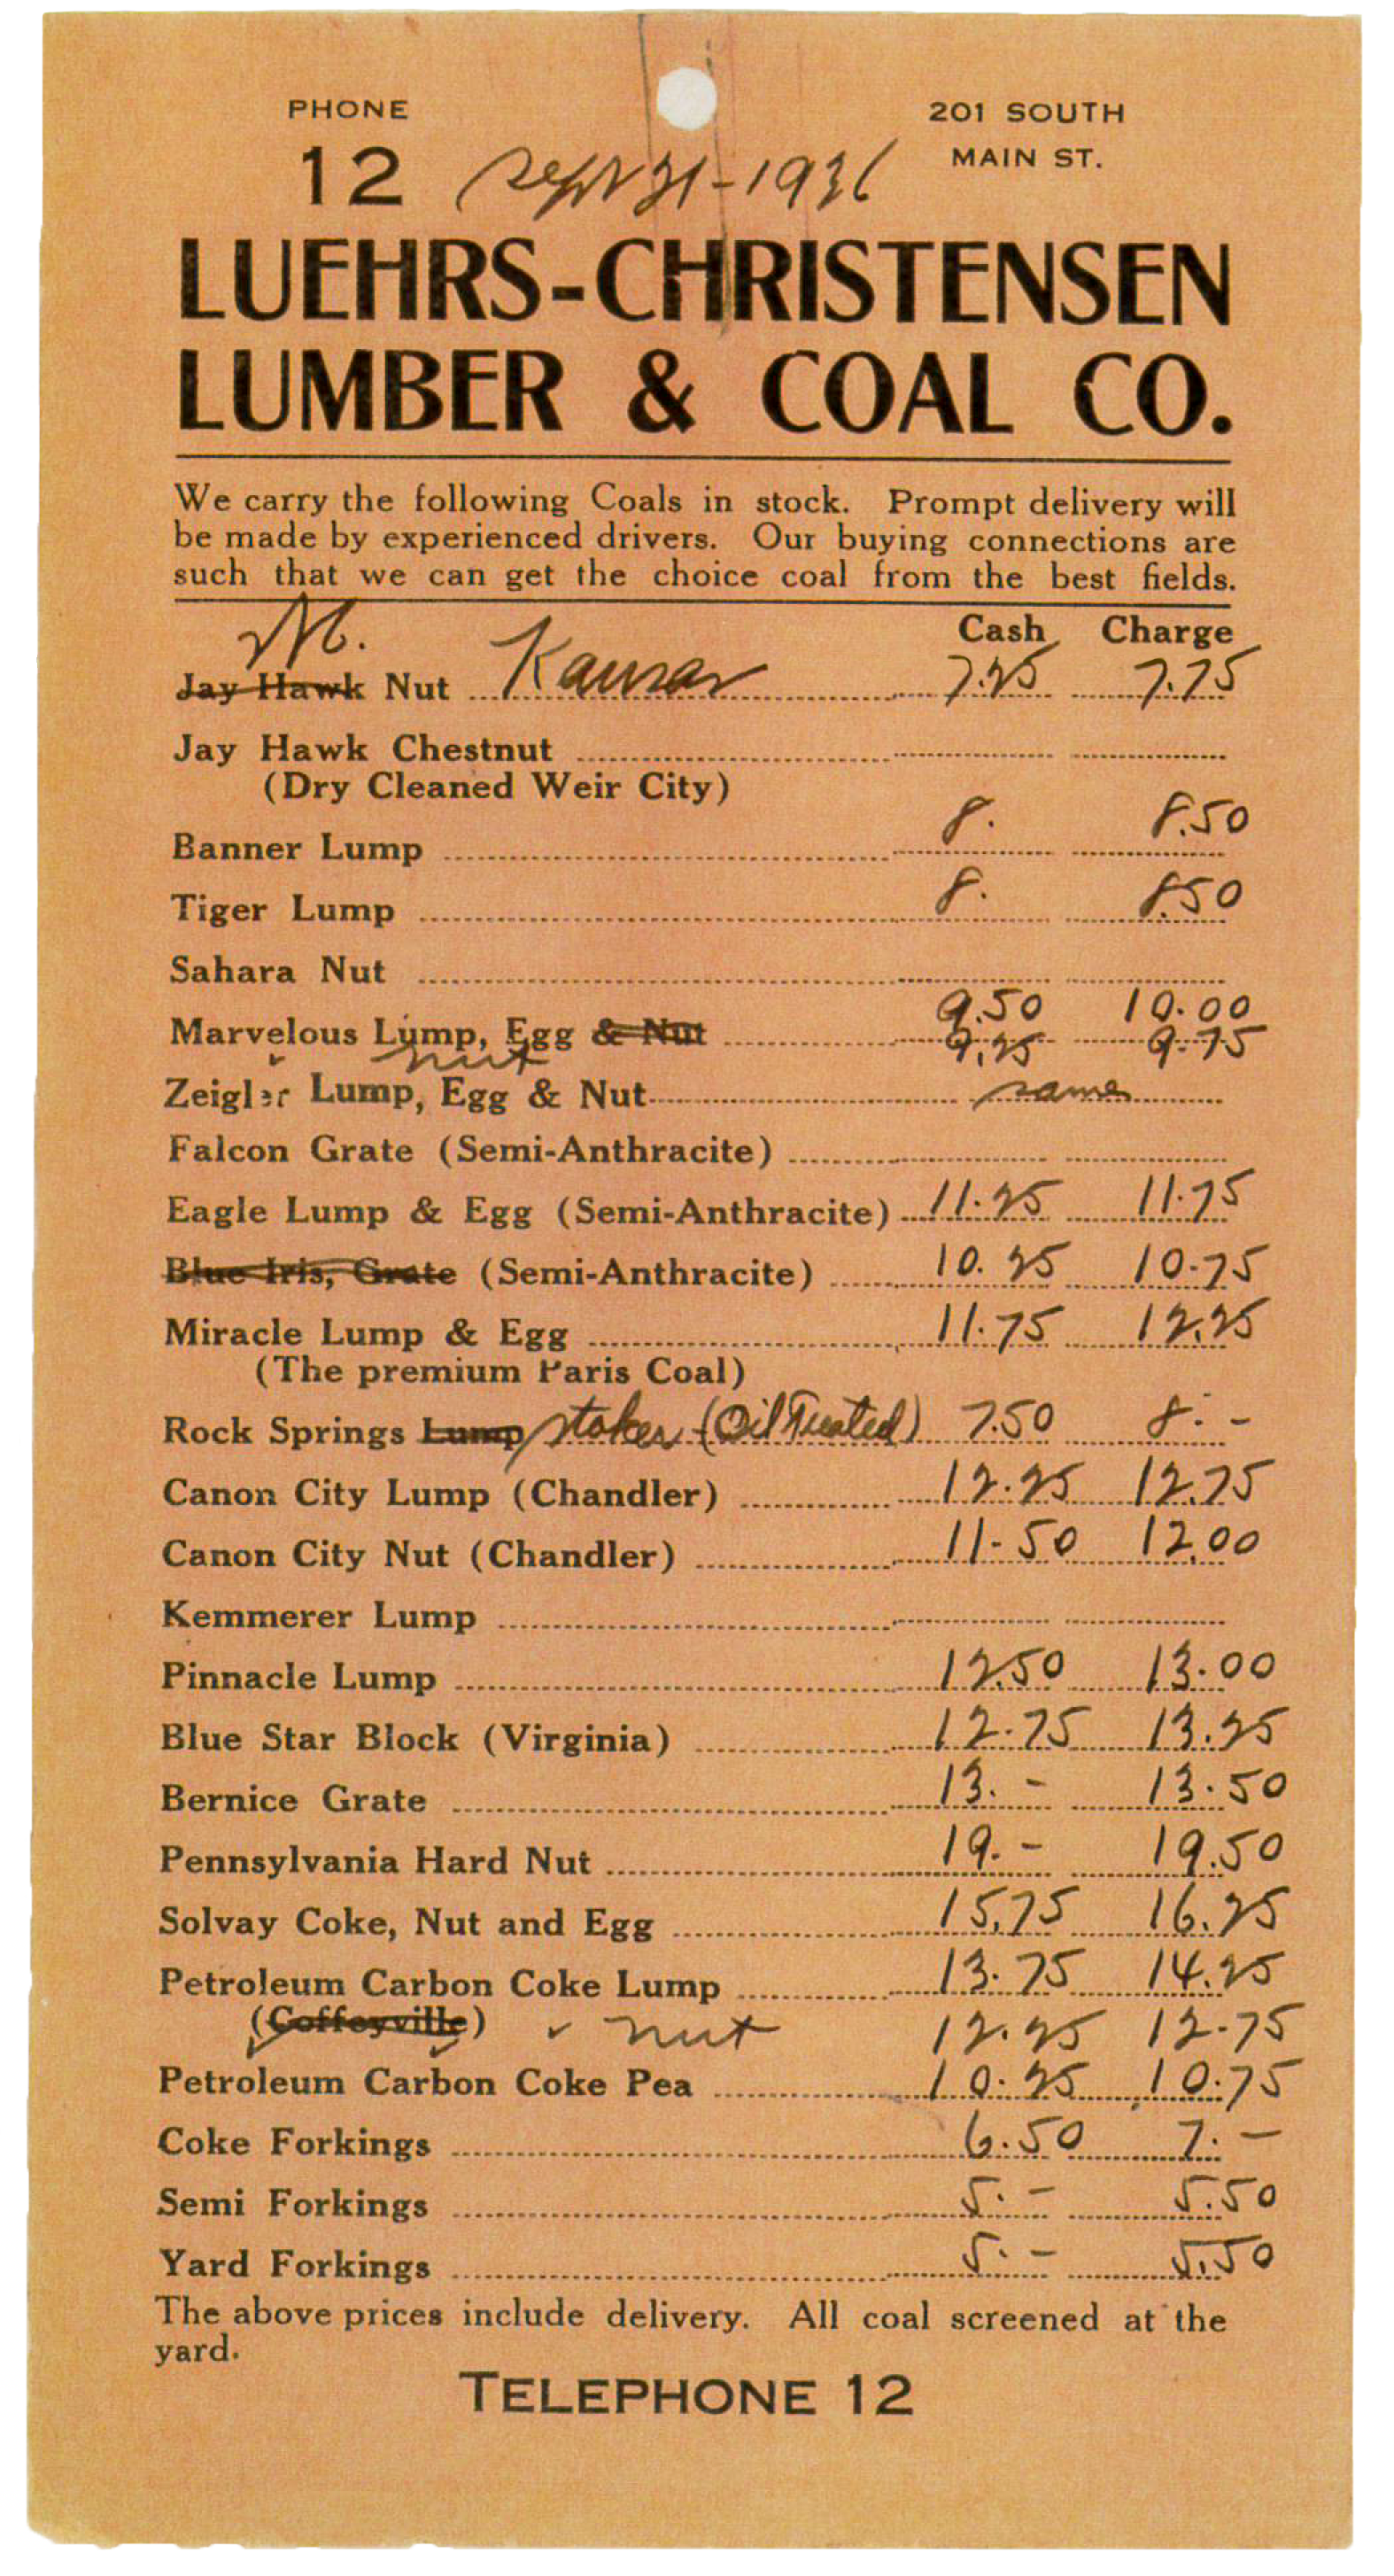 Luehrs-Christensen list of stocked coal with prices, 1936